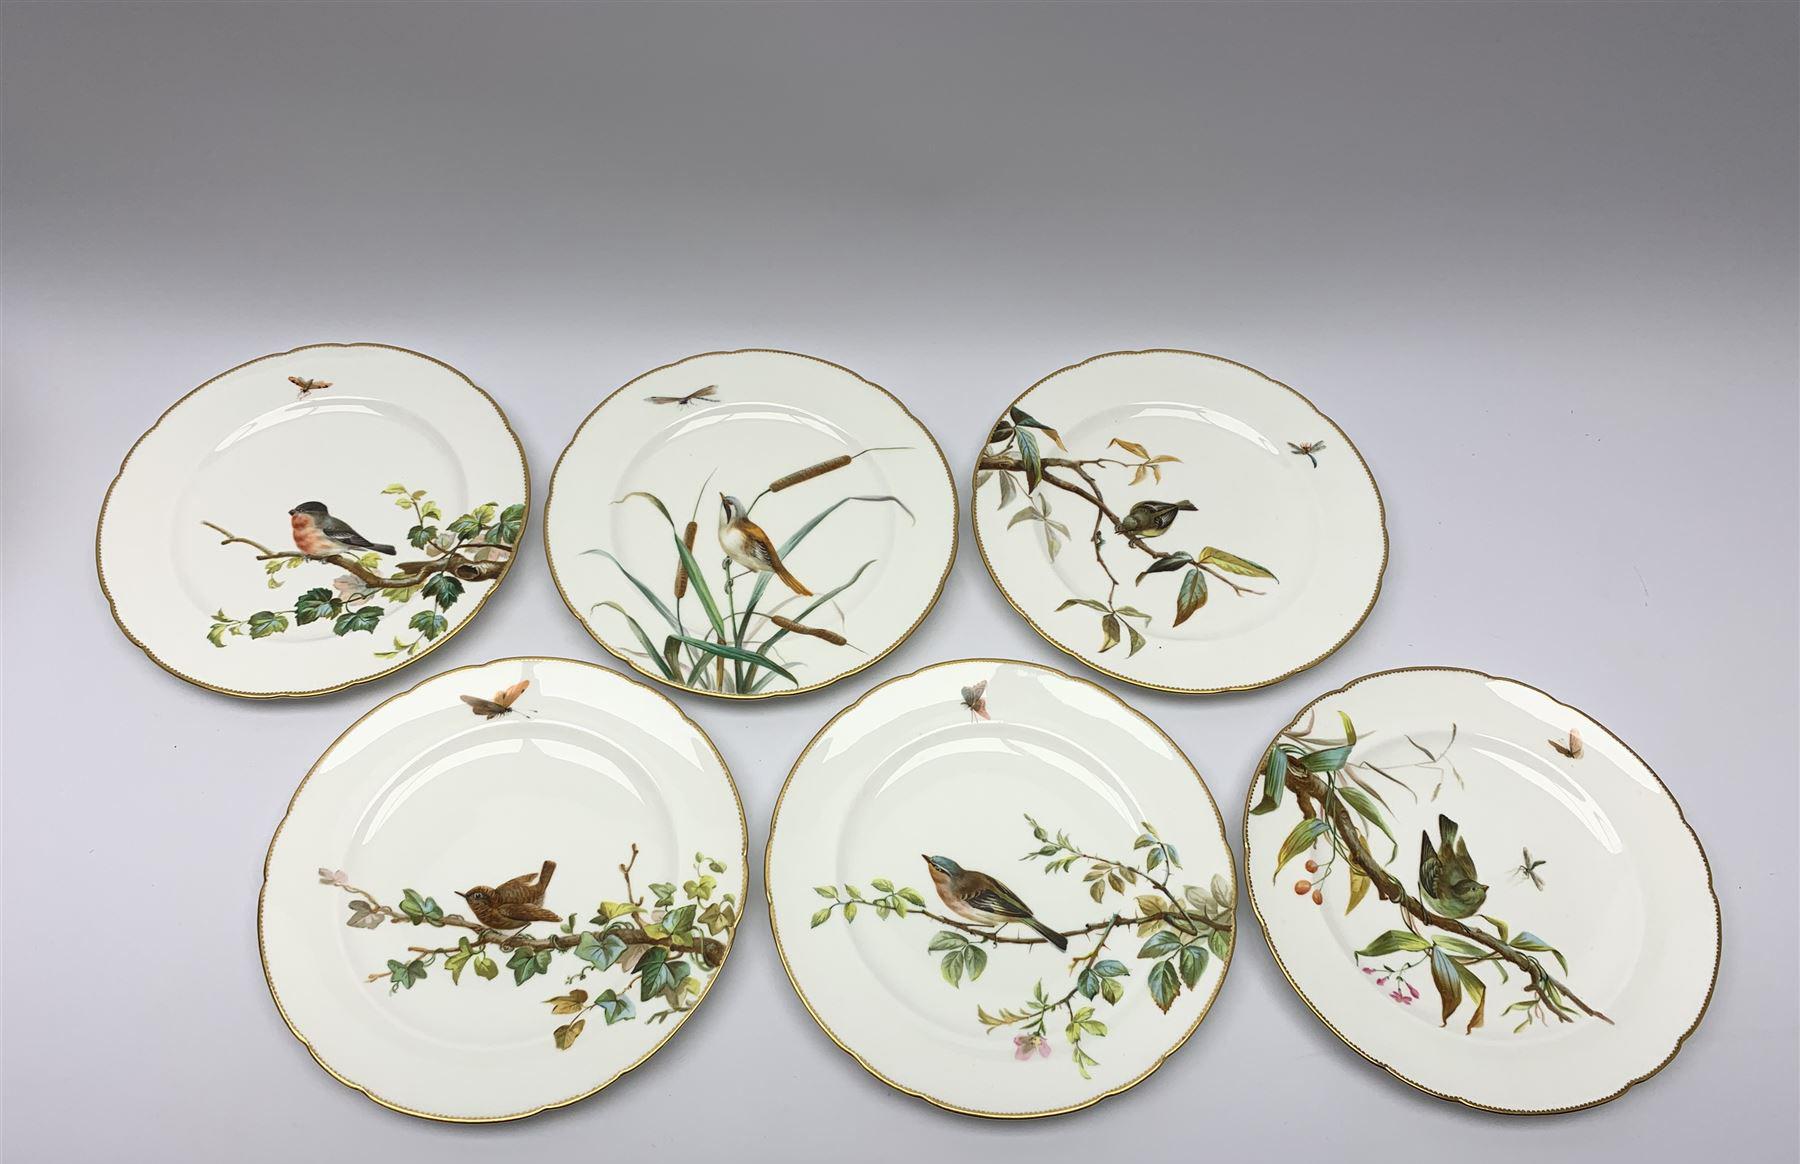 19th Century Minton Bird and Insect Dessert Service 17 Pieces For Sale 1